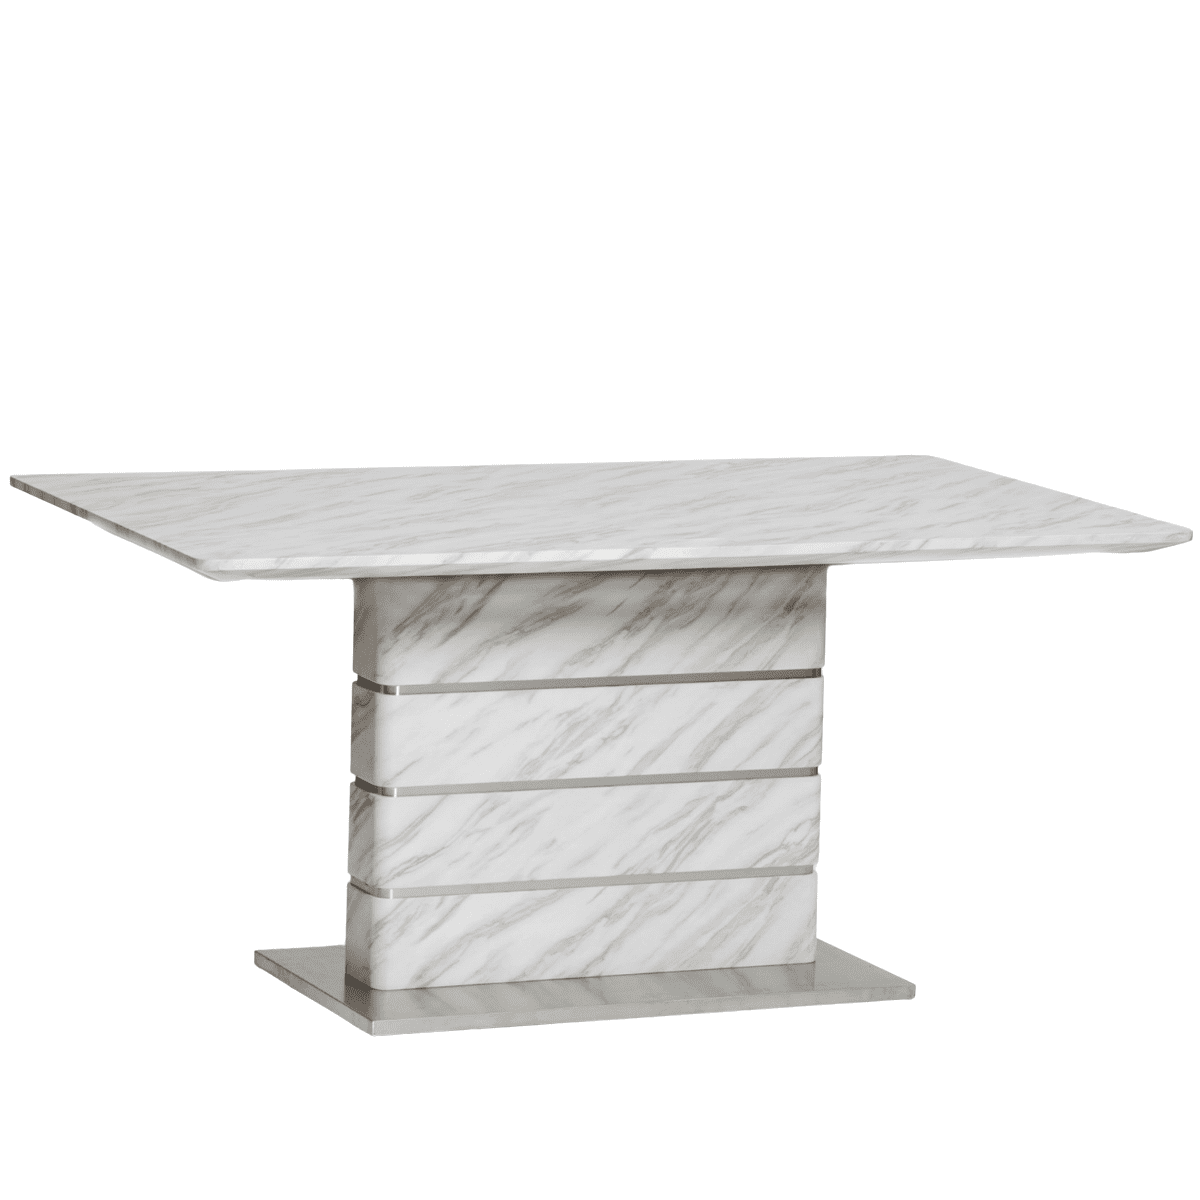 Denny Marble Effect Dining Table